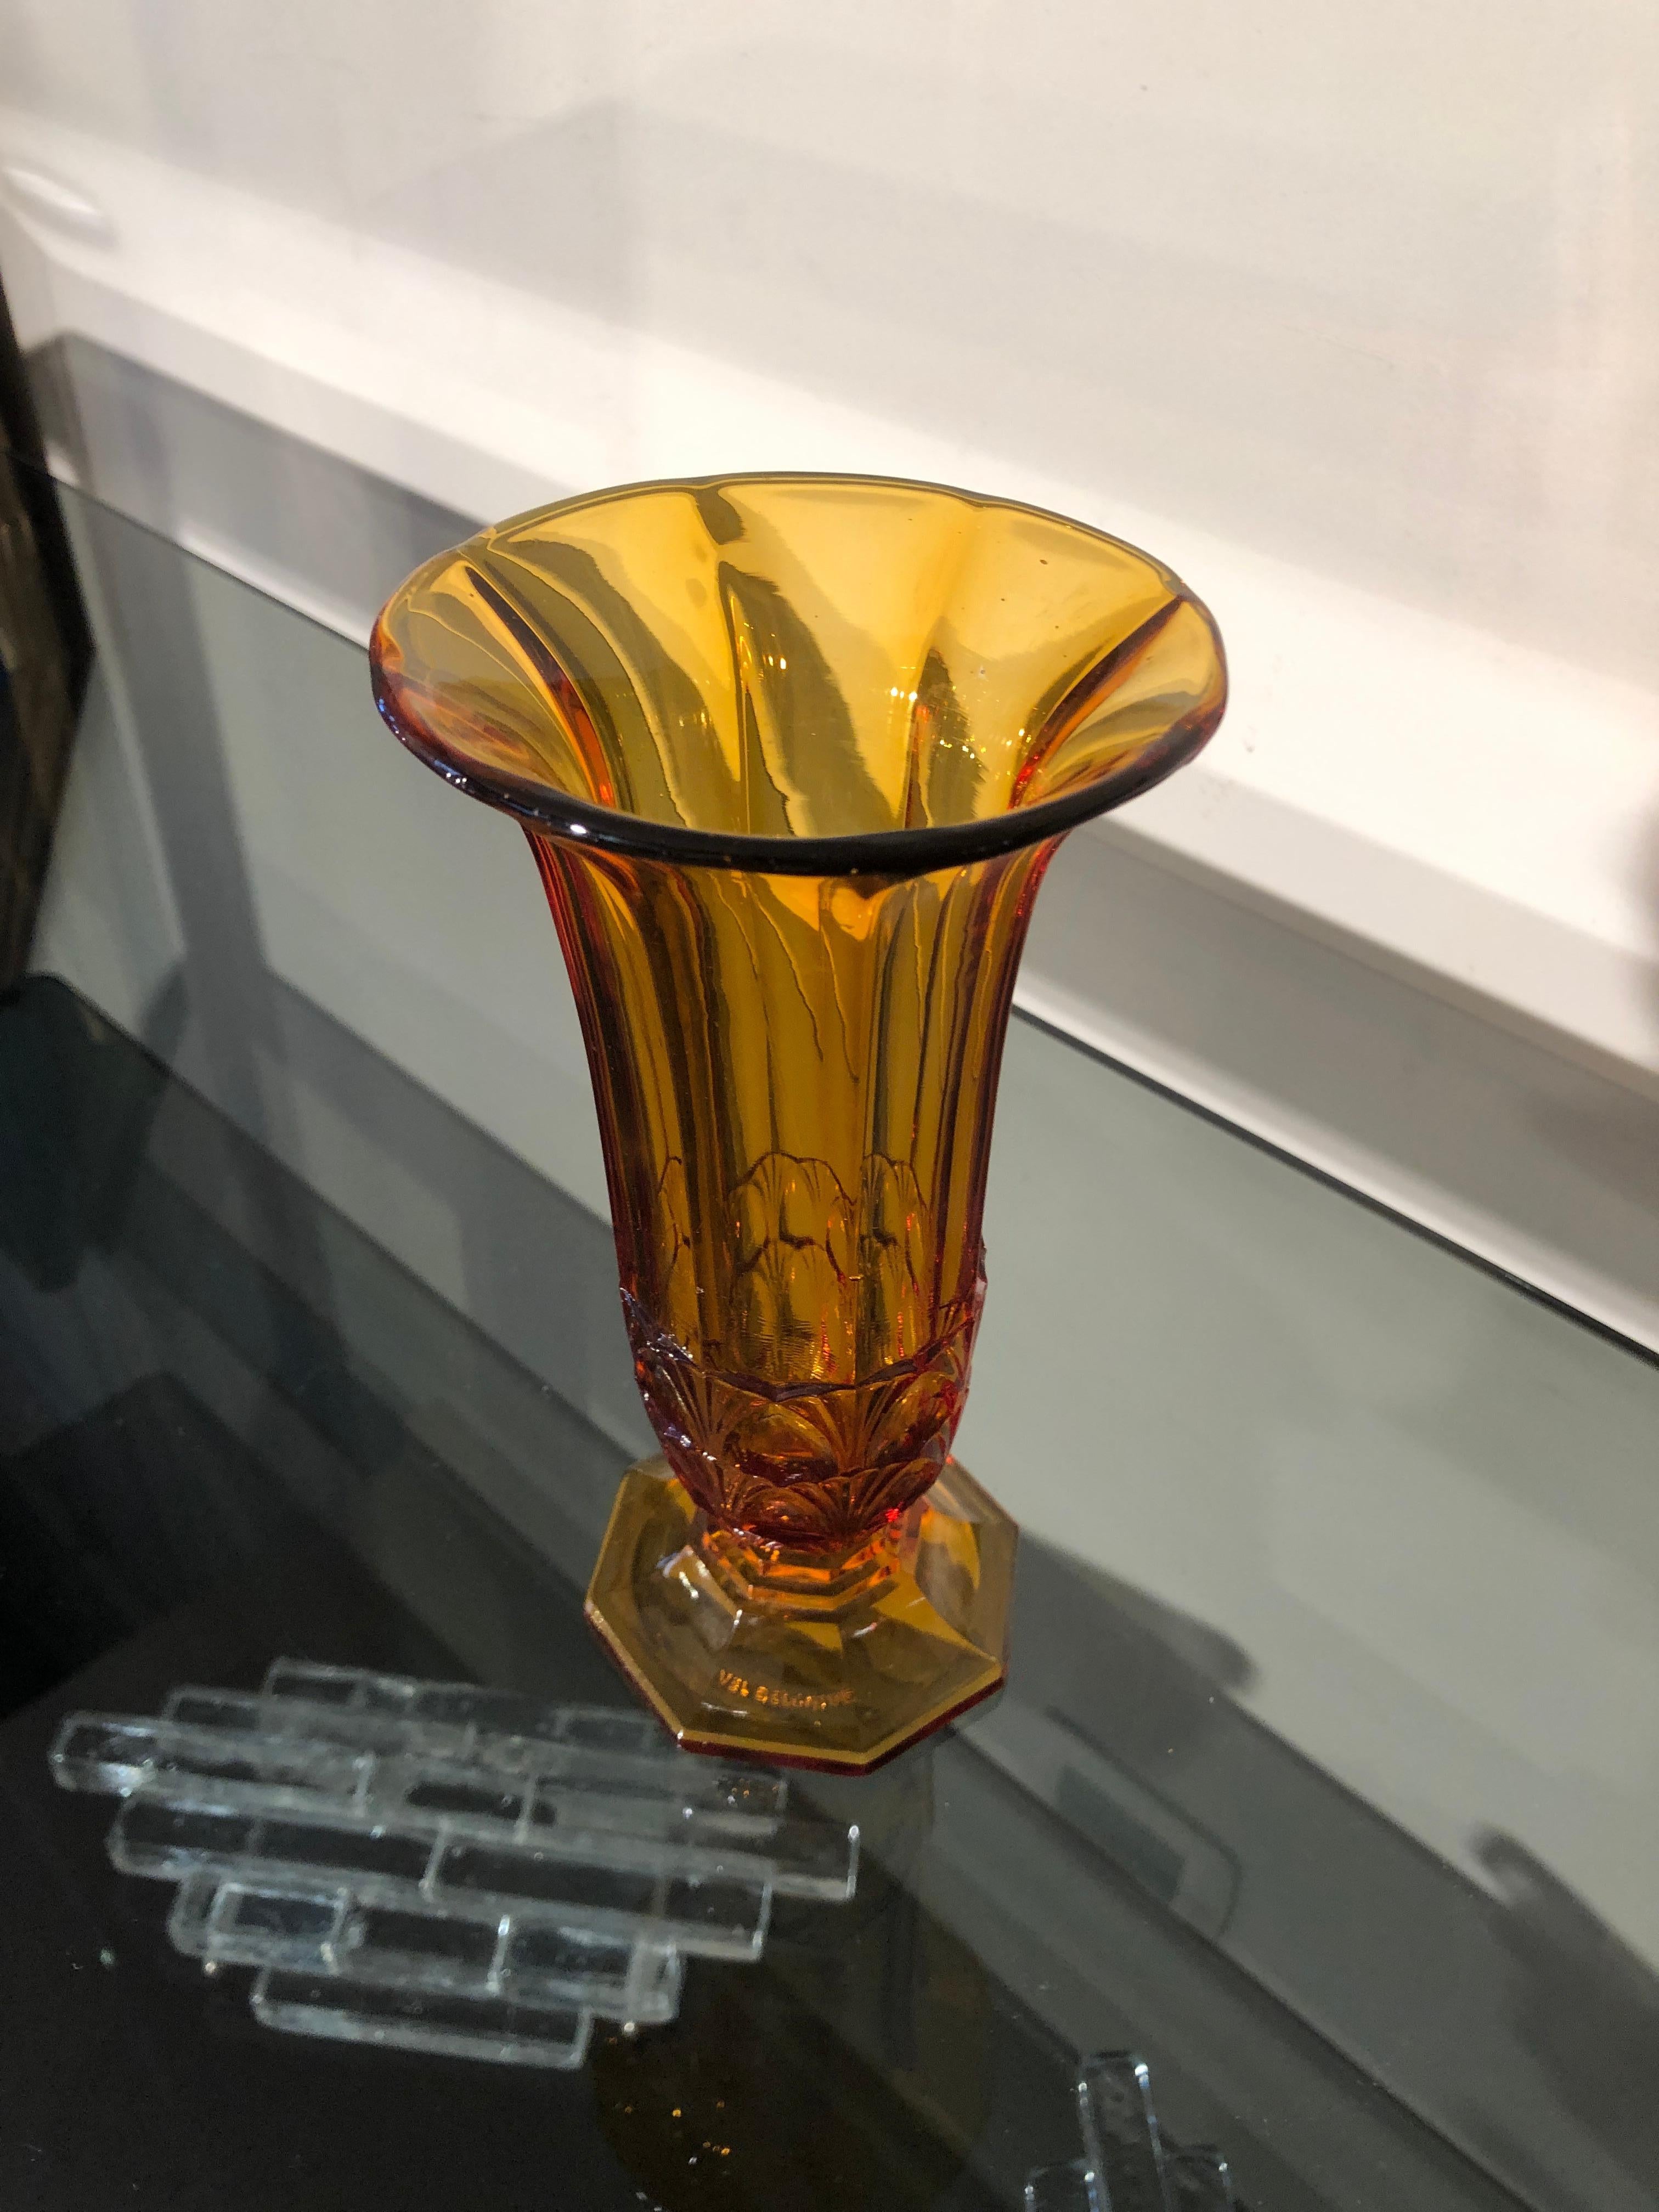 Art Deco Belgian small vase.
Size: Diameter 10.5 cm, height 20 cm.
To be used as desk accessory as well, perfect as charming Christmas gift or wedding present. Again Ideal as a centerpiece or table decoration during a cocktail party. We are able